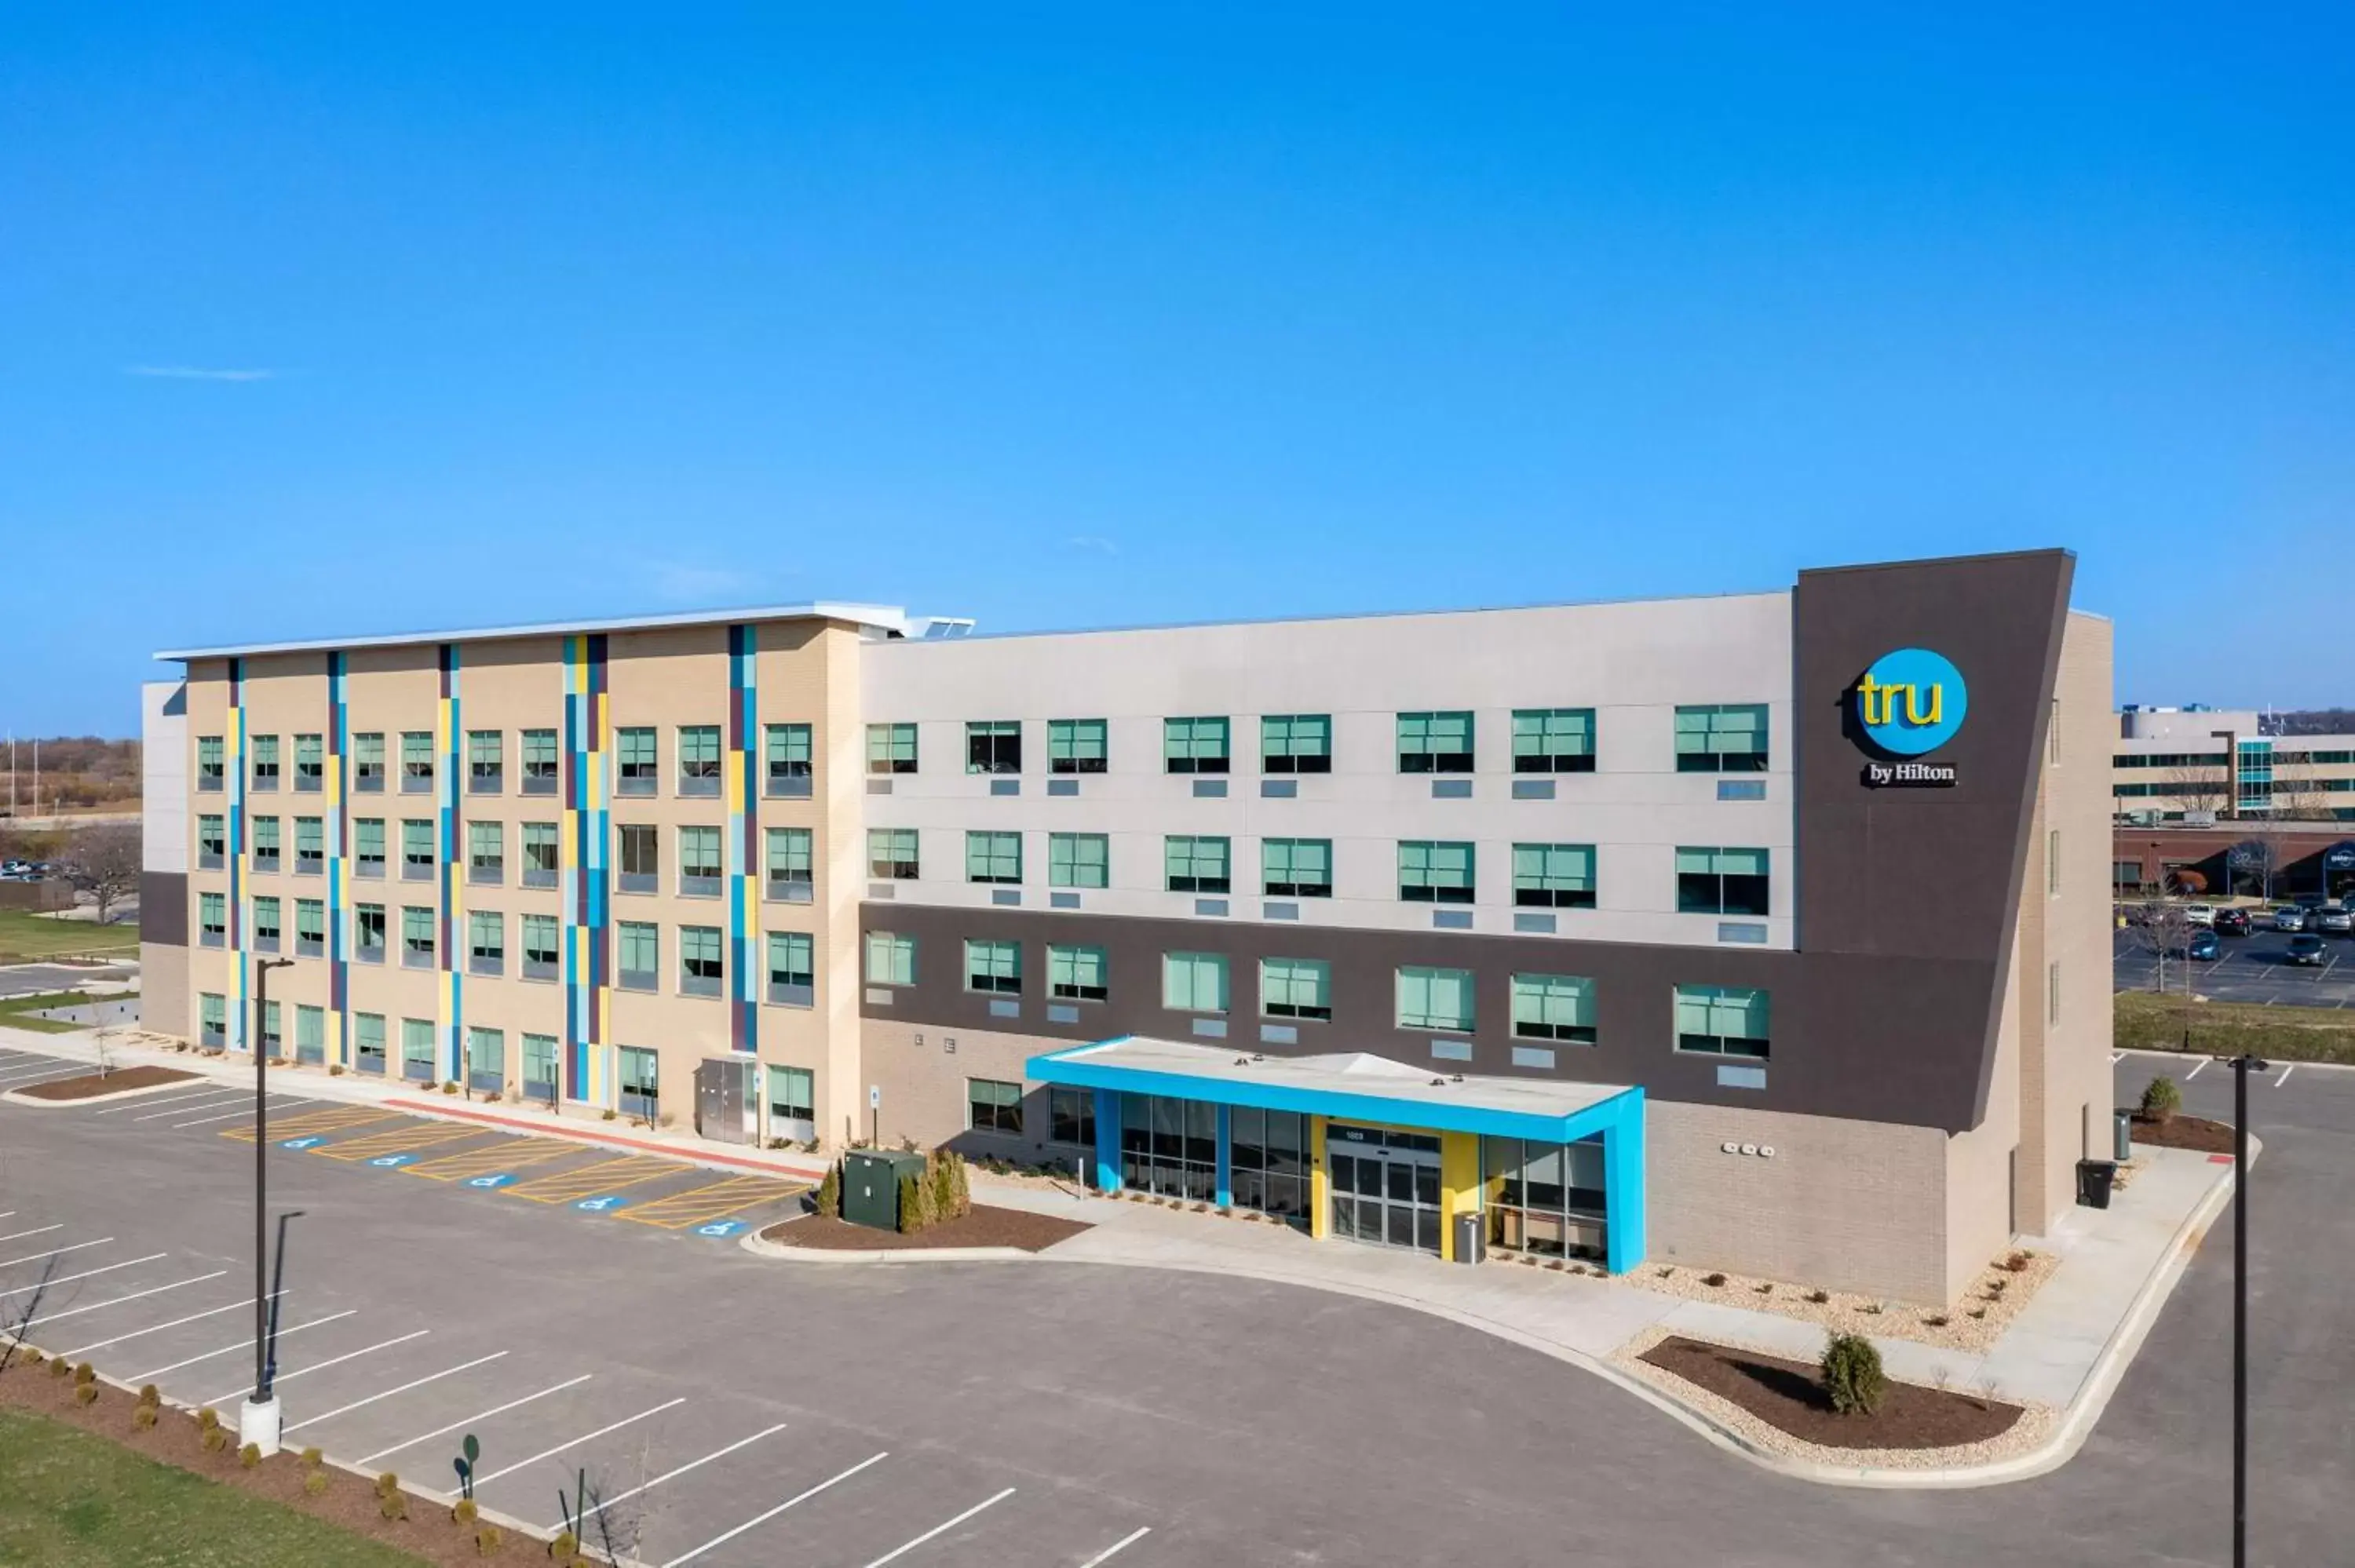 Property Building in Tru By Hilton Naperville Chicago